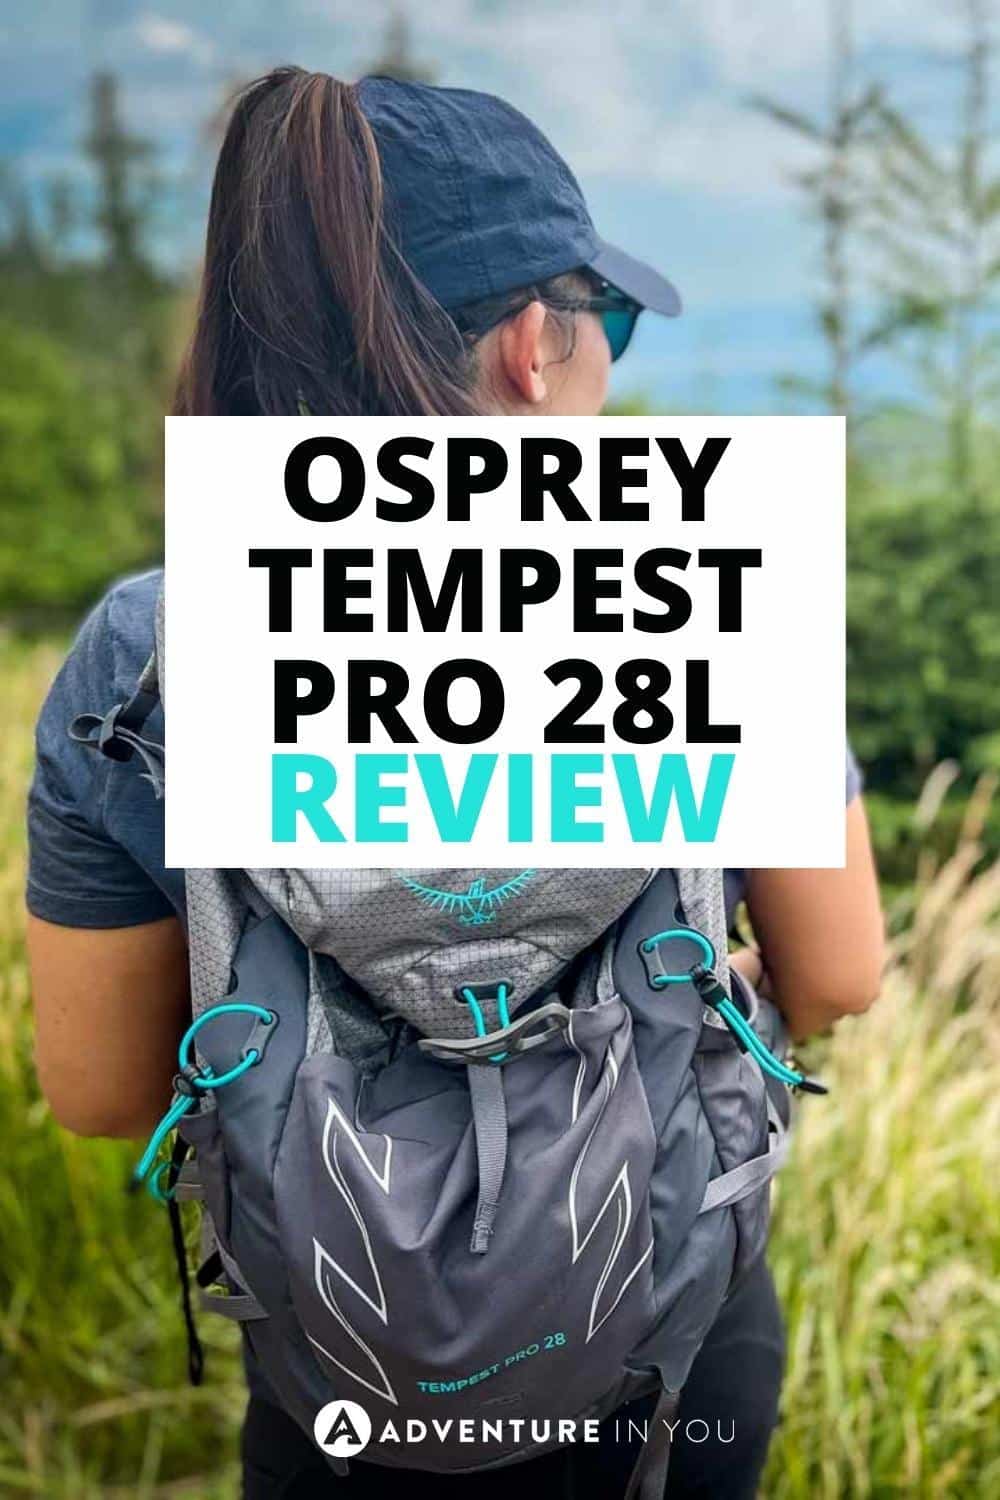 Osprey Tempest Pro Review | Looking for reviews for the Osprey Tempest Pro 28L hiking backpack? Click here to find out more.